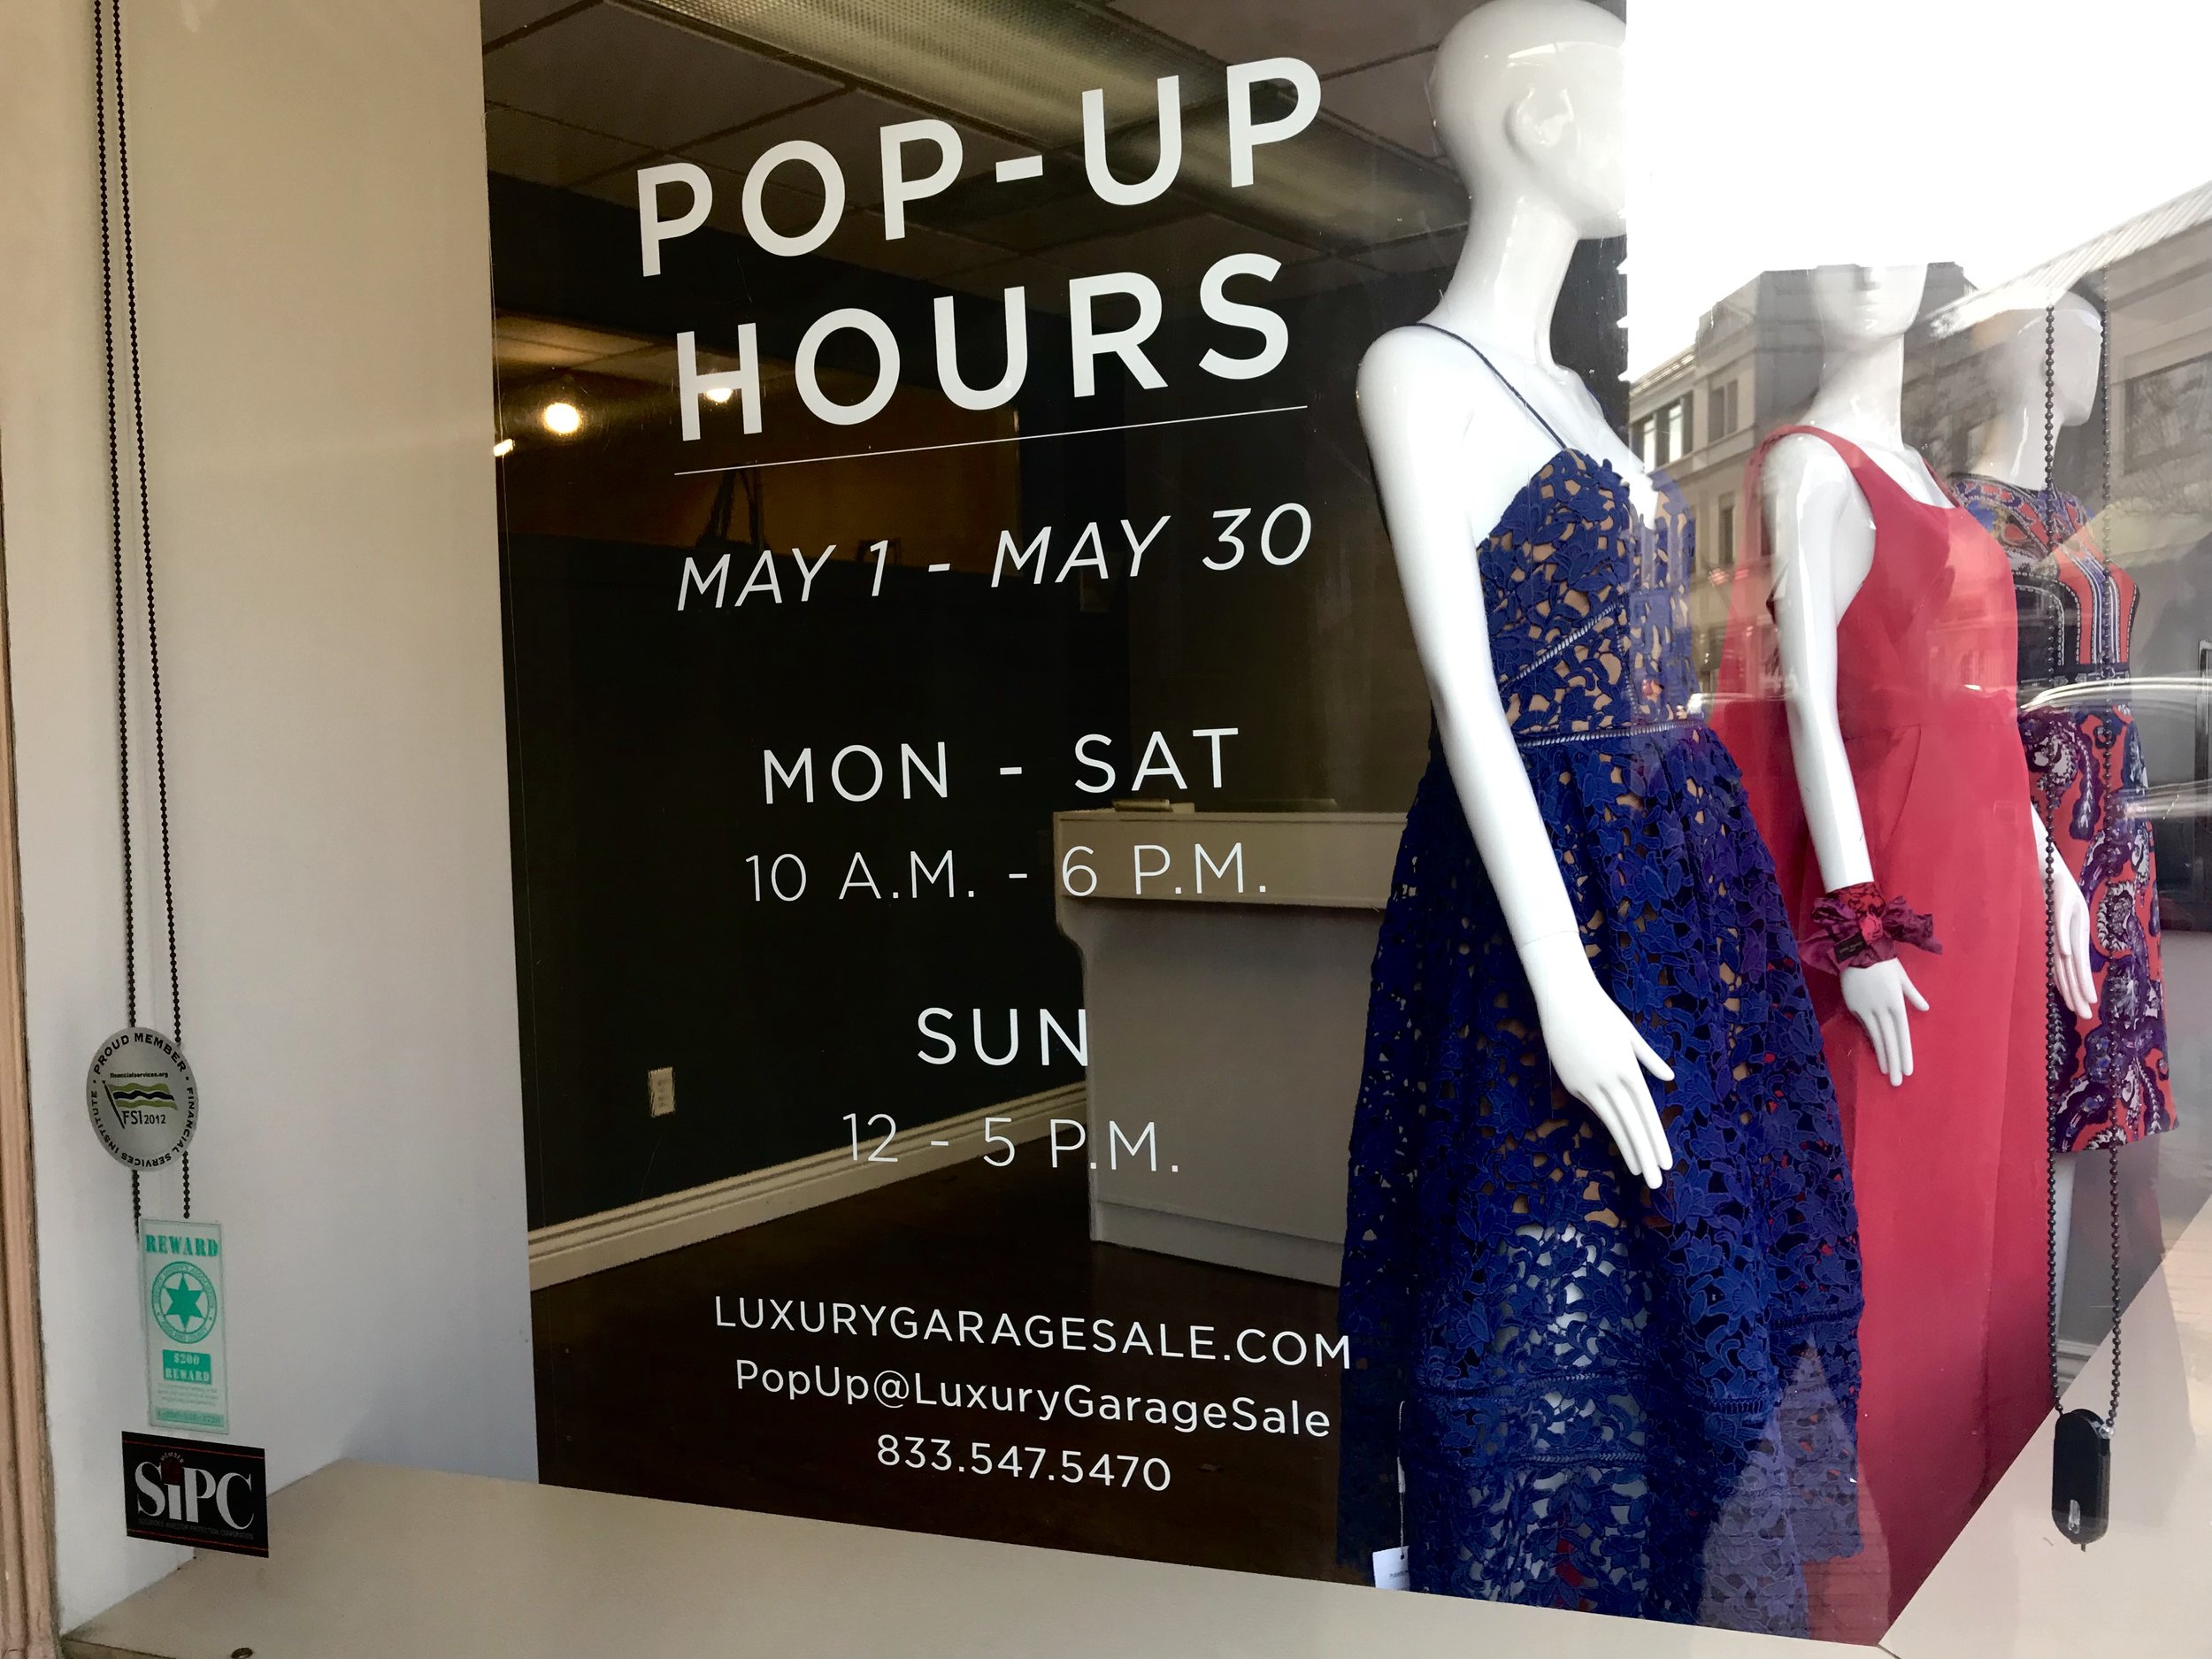 Luxury Garage Sale is opening a 30-day pop-up store in Westfield on Aug. 15